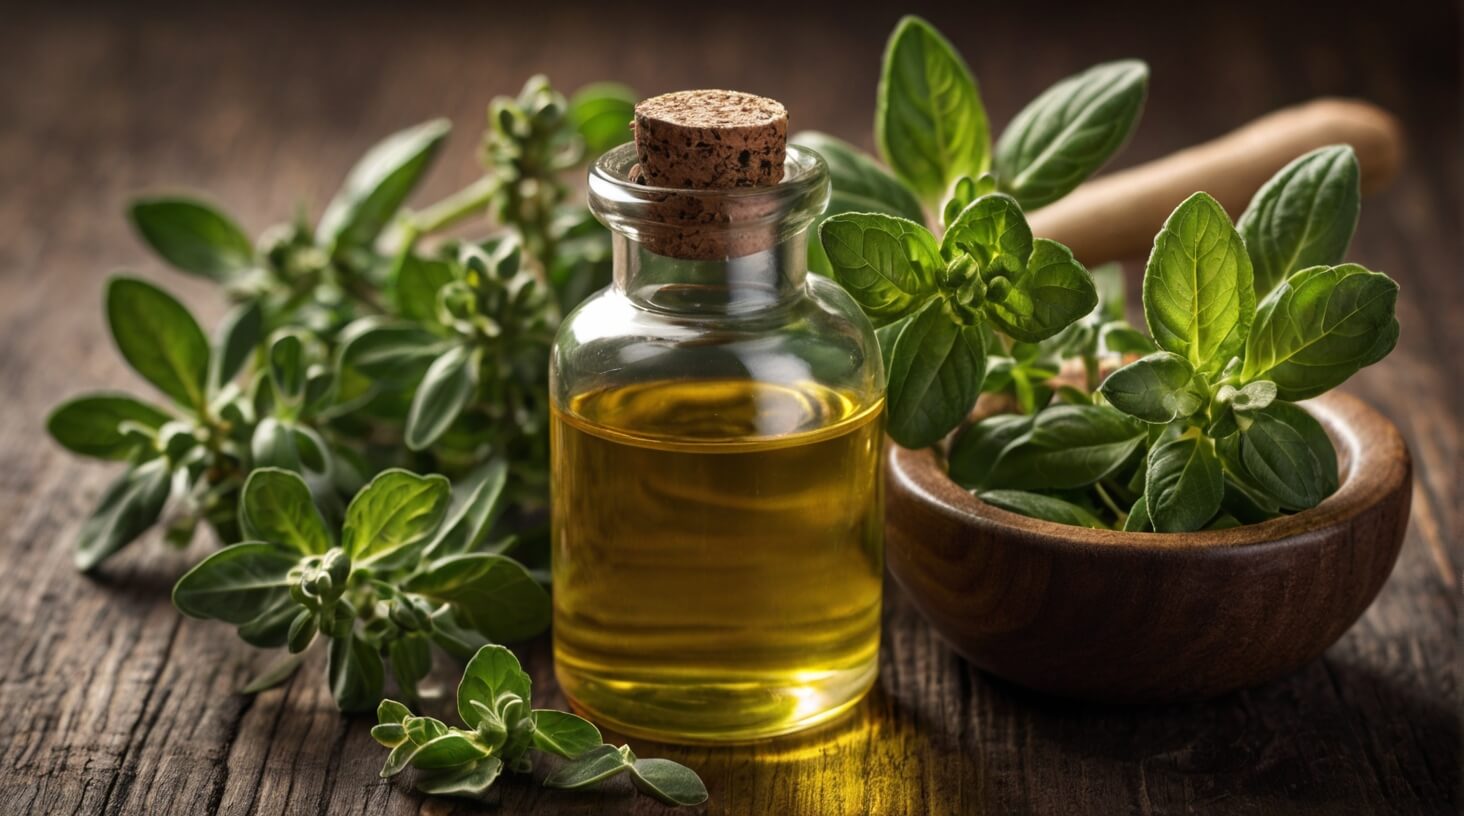 A bottle of oregano oil surrounded by fresh oregano leaves, representing the rich history of oregano oil use.